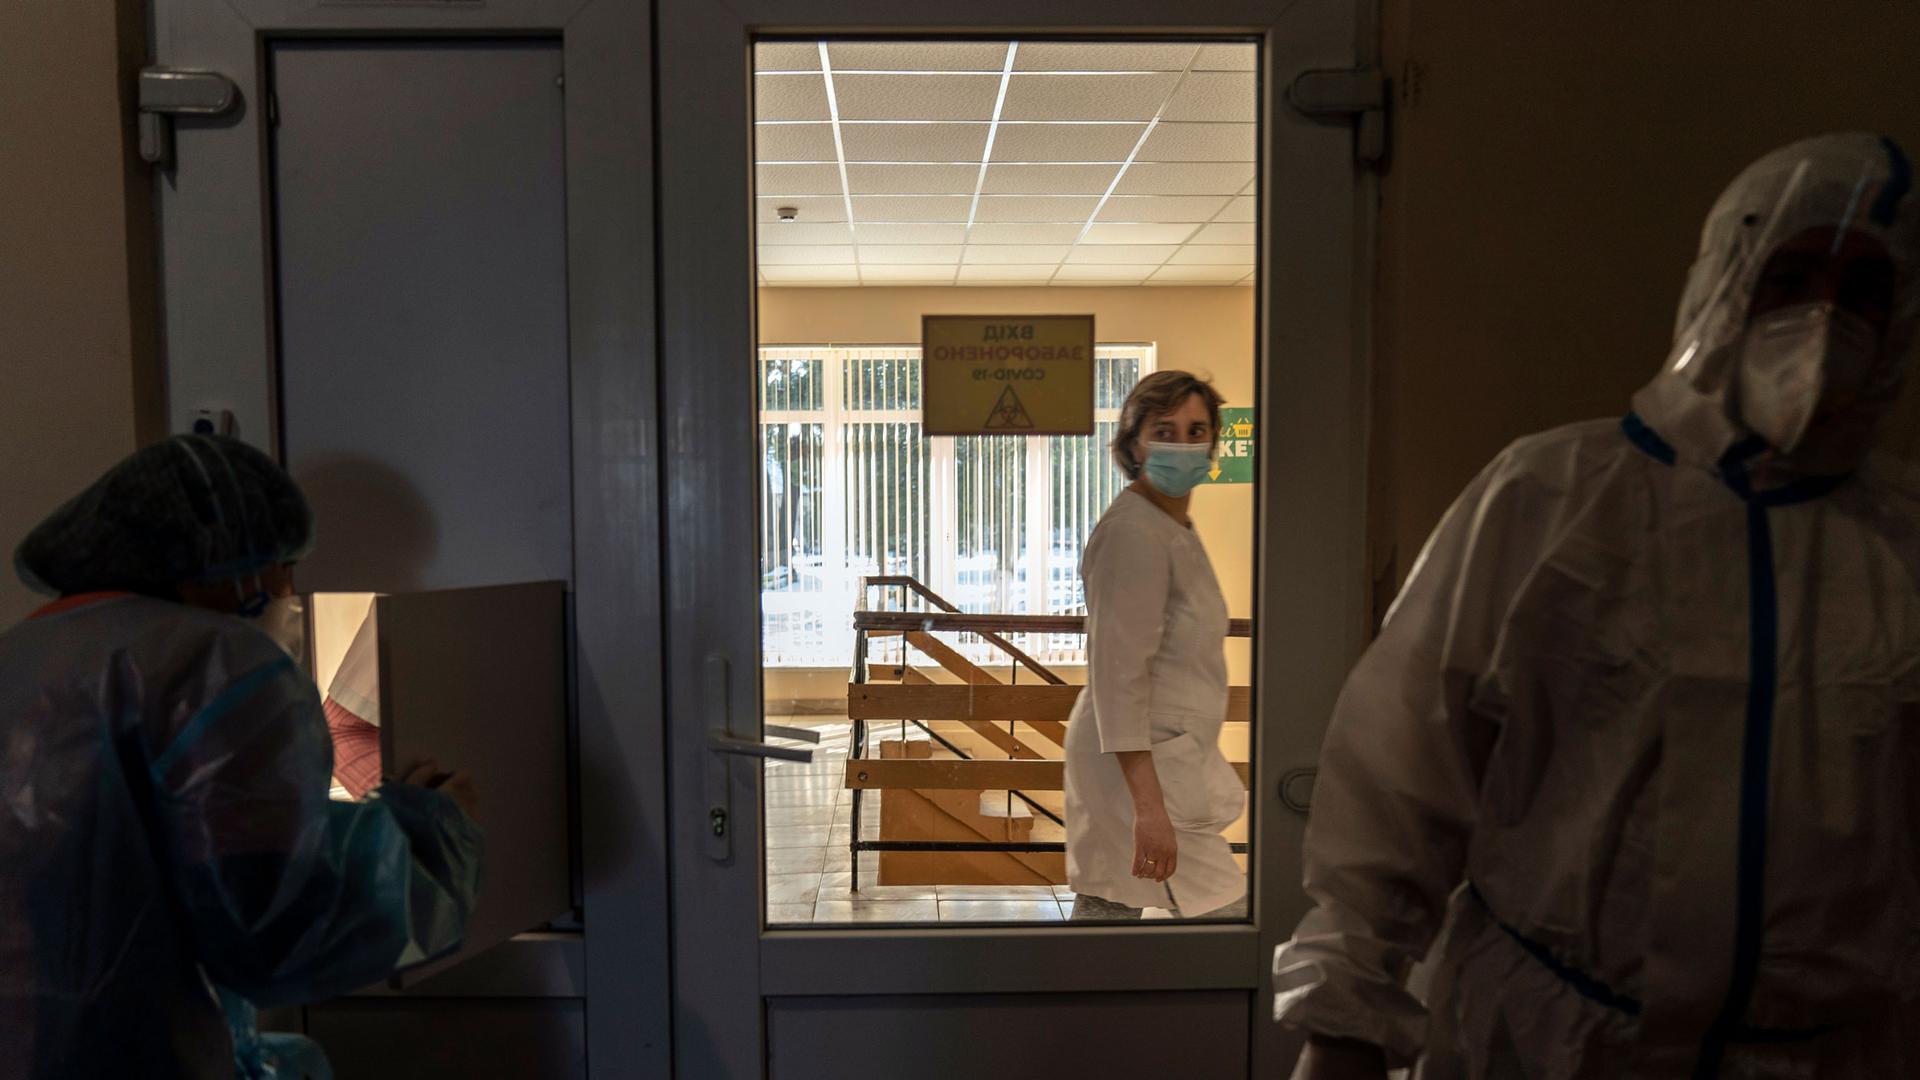 A nurse is shown through the glass of a closed door looking into a darkened room with two other medical professionals dressed in protective clothing.